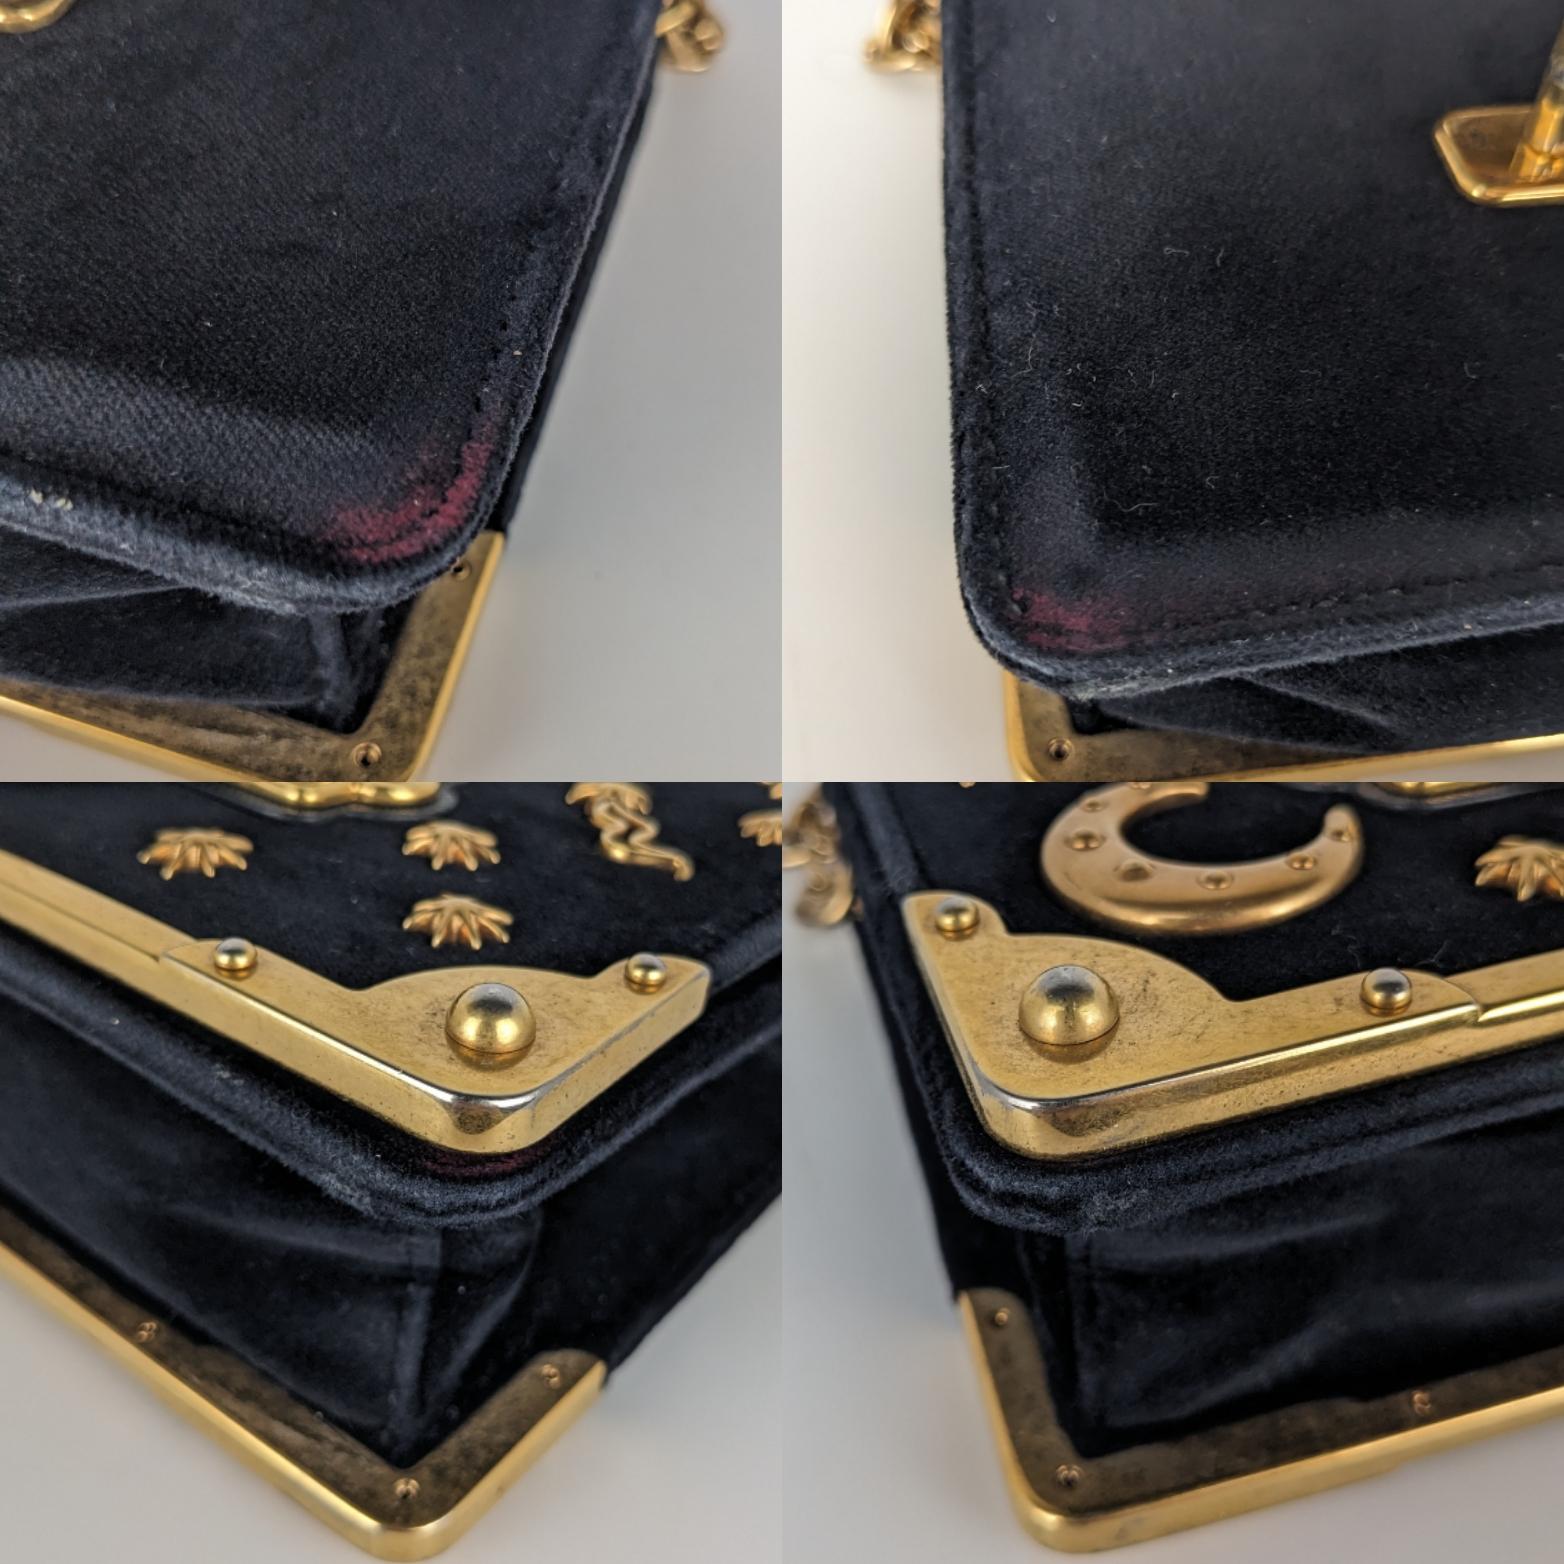 Condition: This authentic Prada bag is in overall good pre-loved condition. There are scratches and fading on the hardware, light edge wear on velvet and red discoloration under flap. Scratches on interior leather.

No accessories included (dust